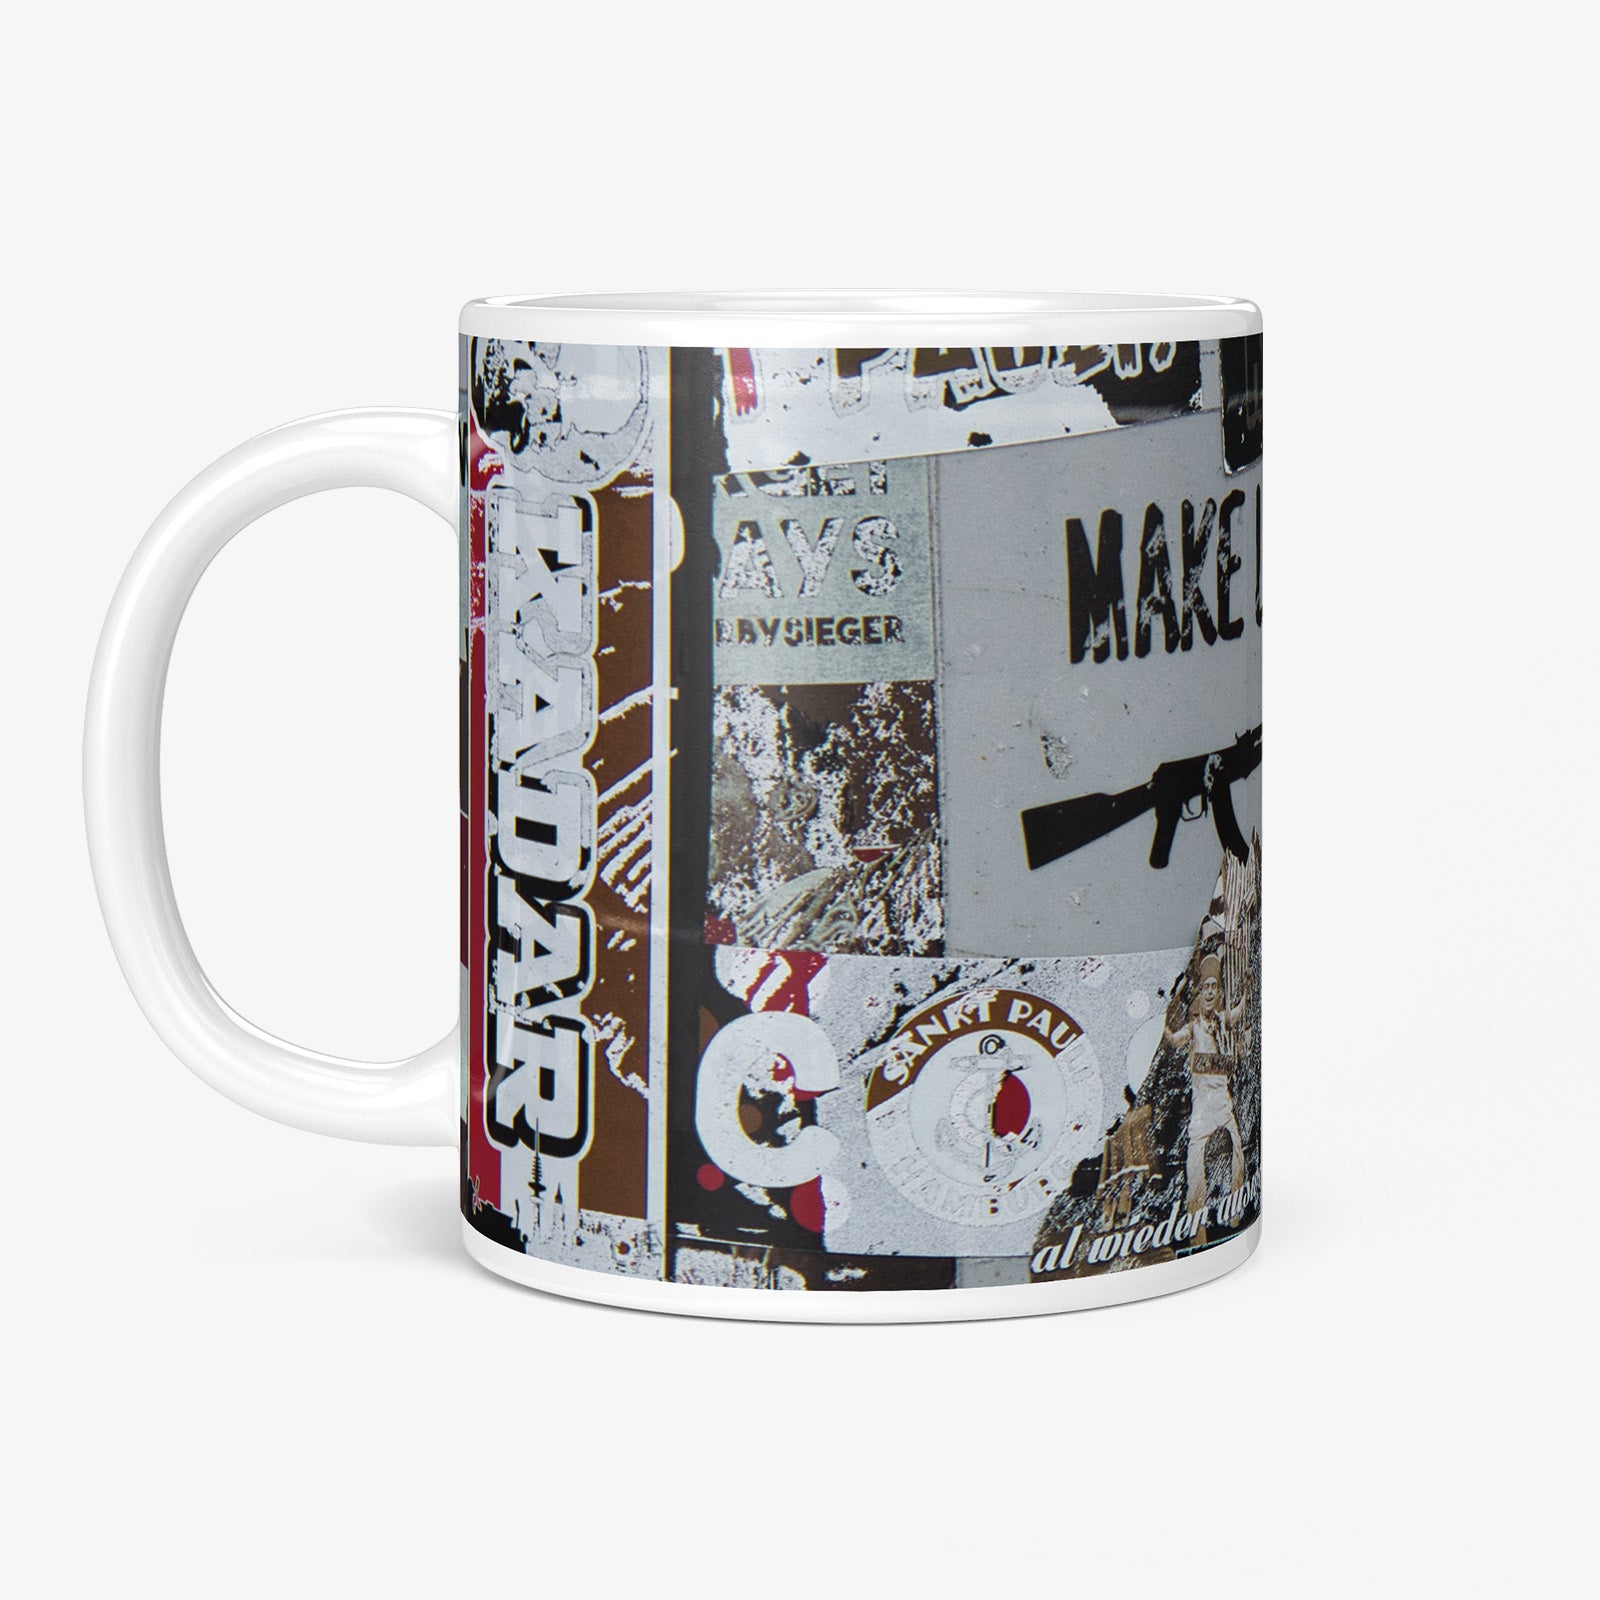 Be inspired by our Urban Art Coffee Mug "St. Pauli - No2" from Hamburg. This mug features an 11oz size with the handle on the left.